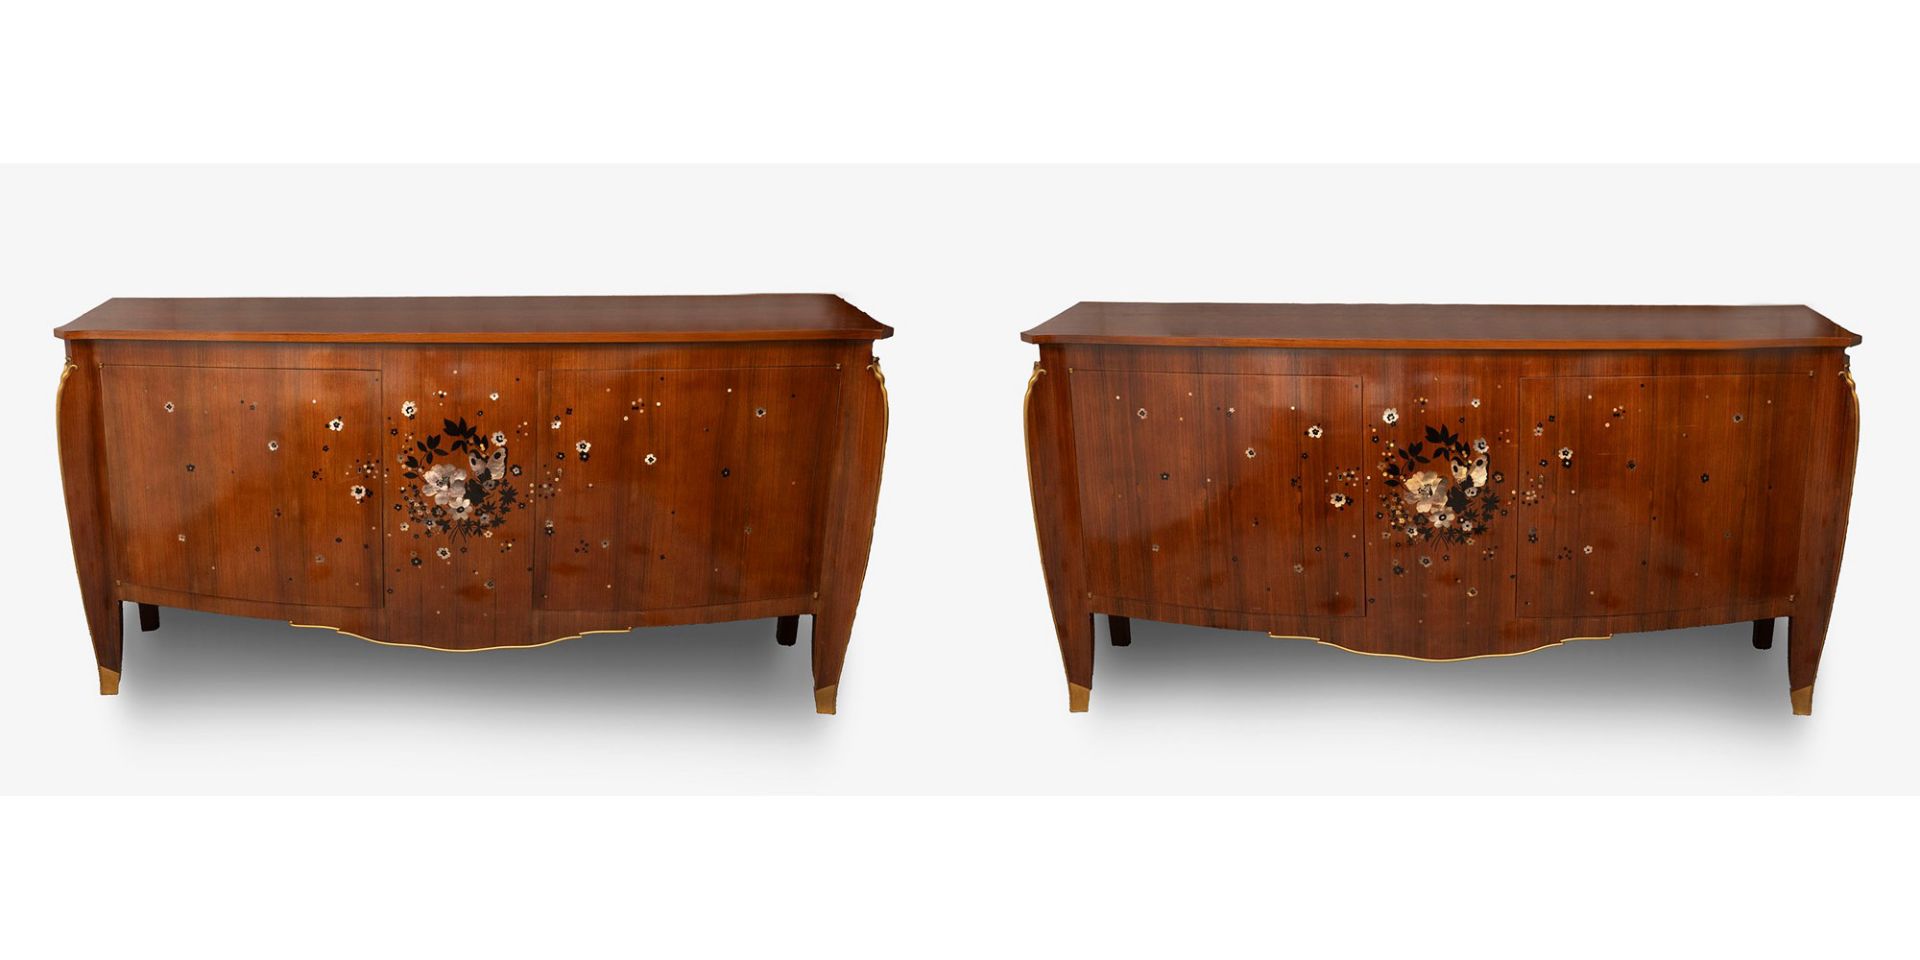 Jules Leleu - Important and rare pair of commodes inlaid with mother of pearl and various woods